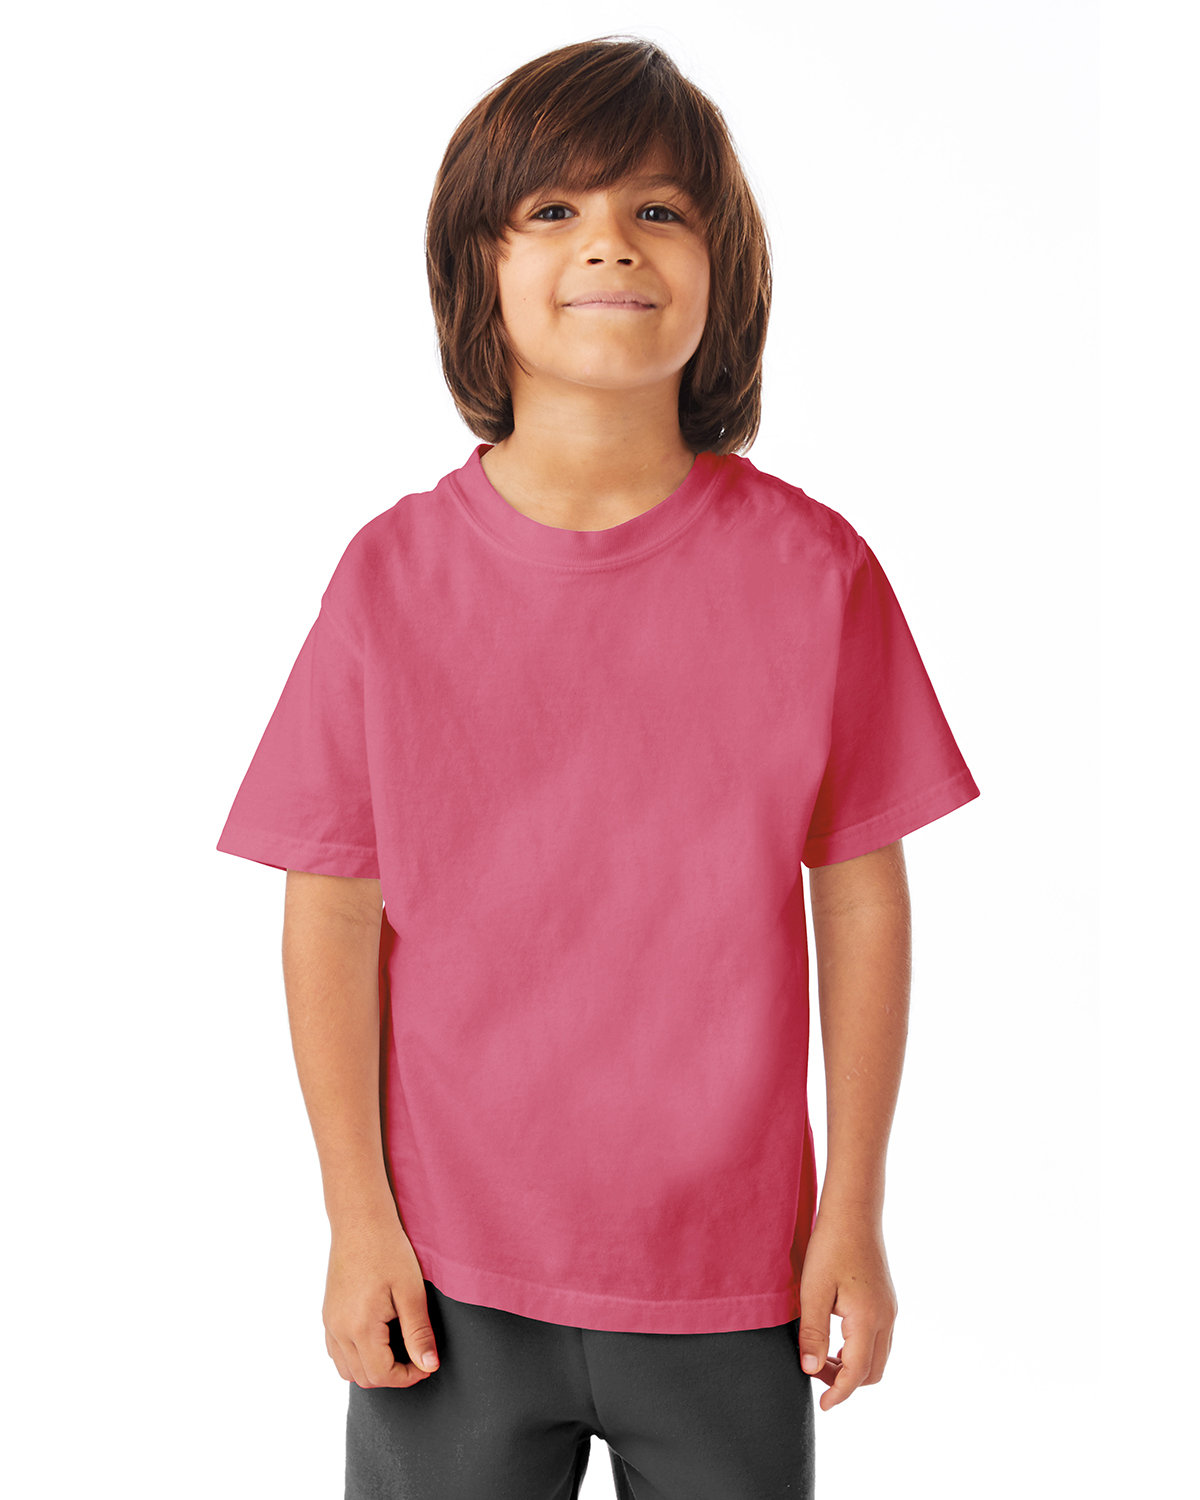 ComfortWash by Hanes Youth Garment-Dyed T-Shirt CORAL CRAZE 